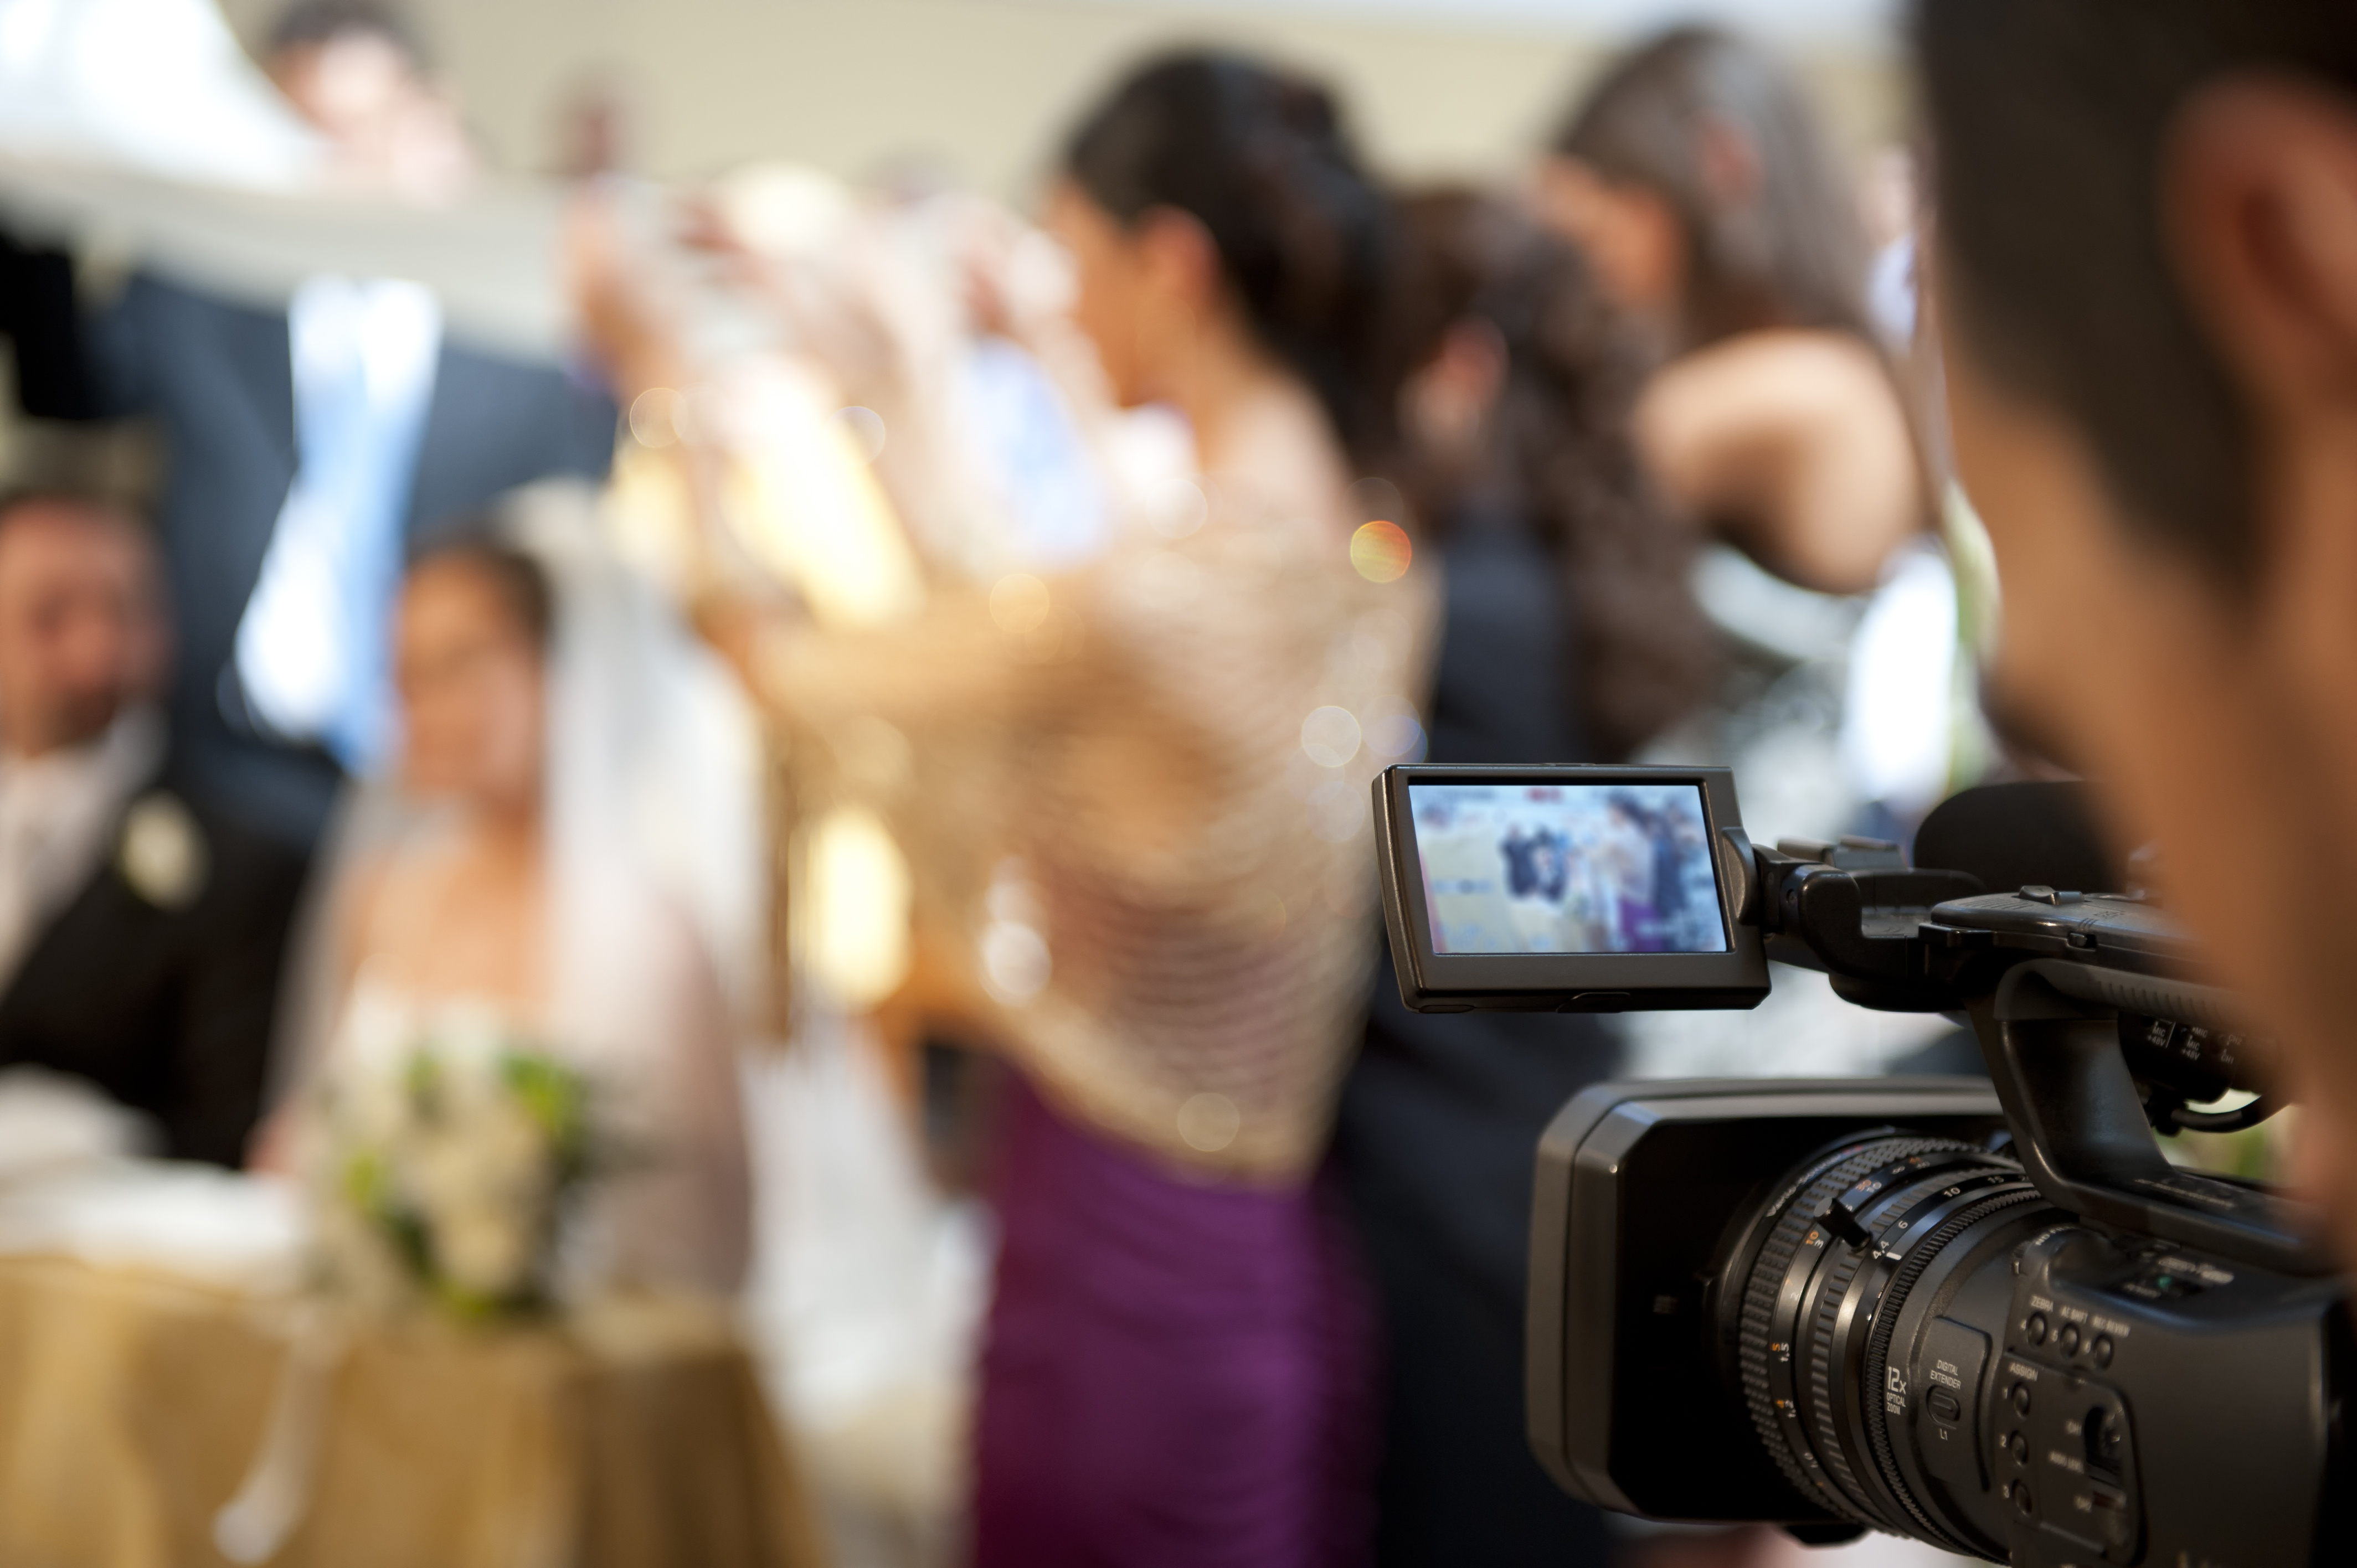 Cameraman recording video of a marriage